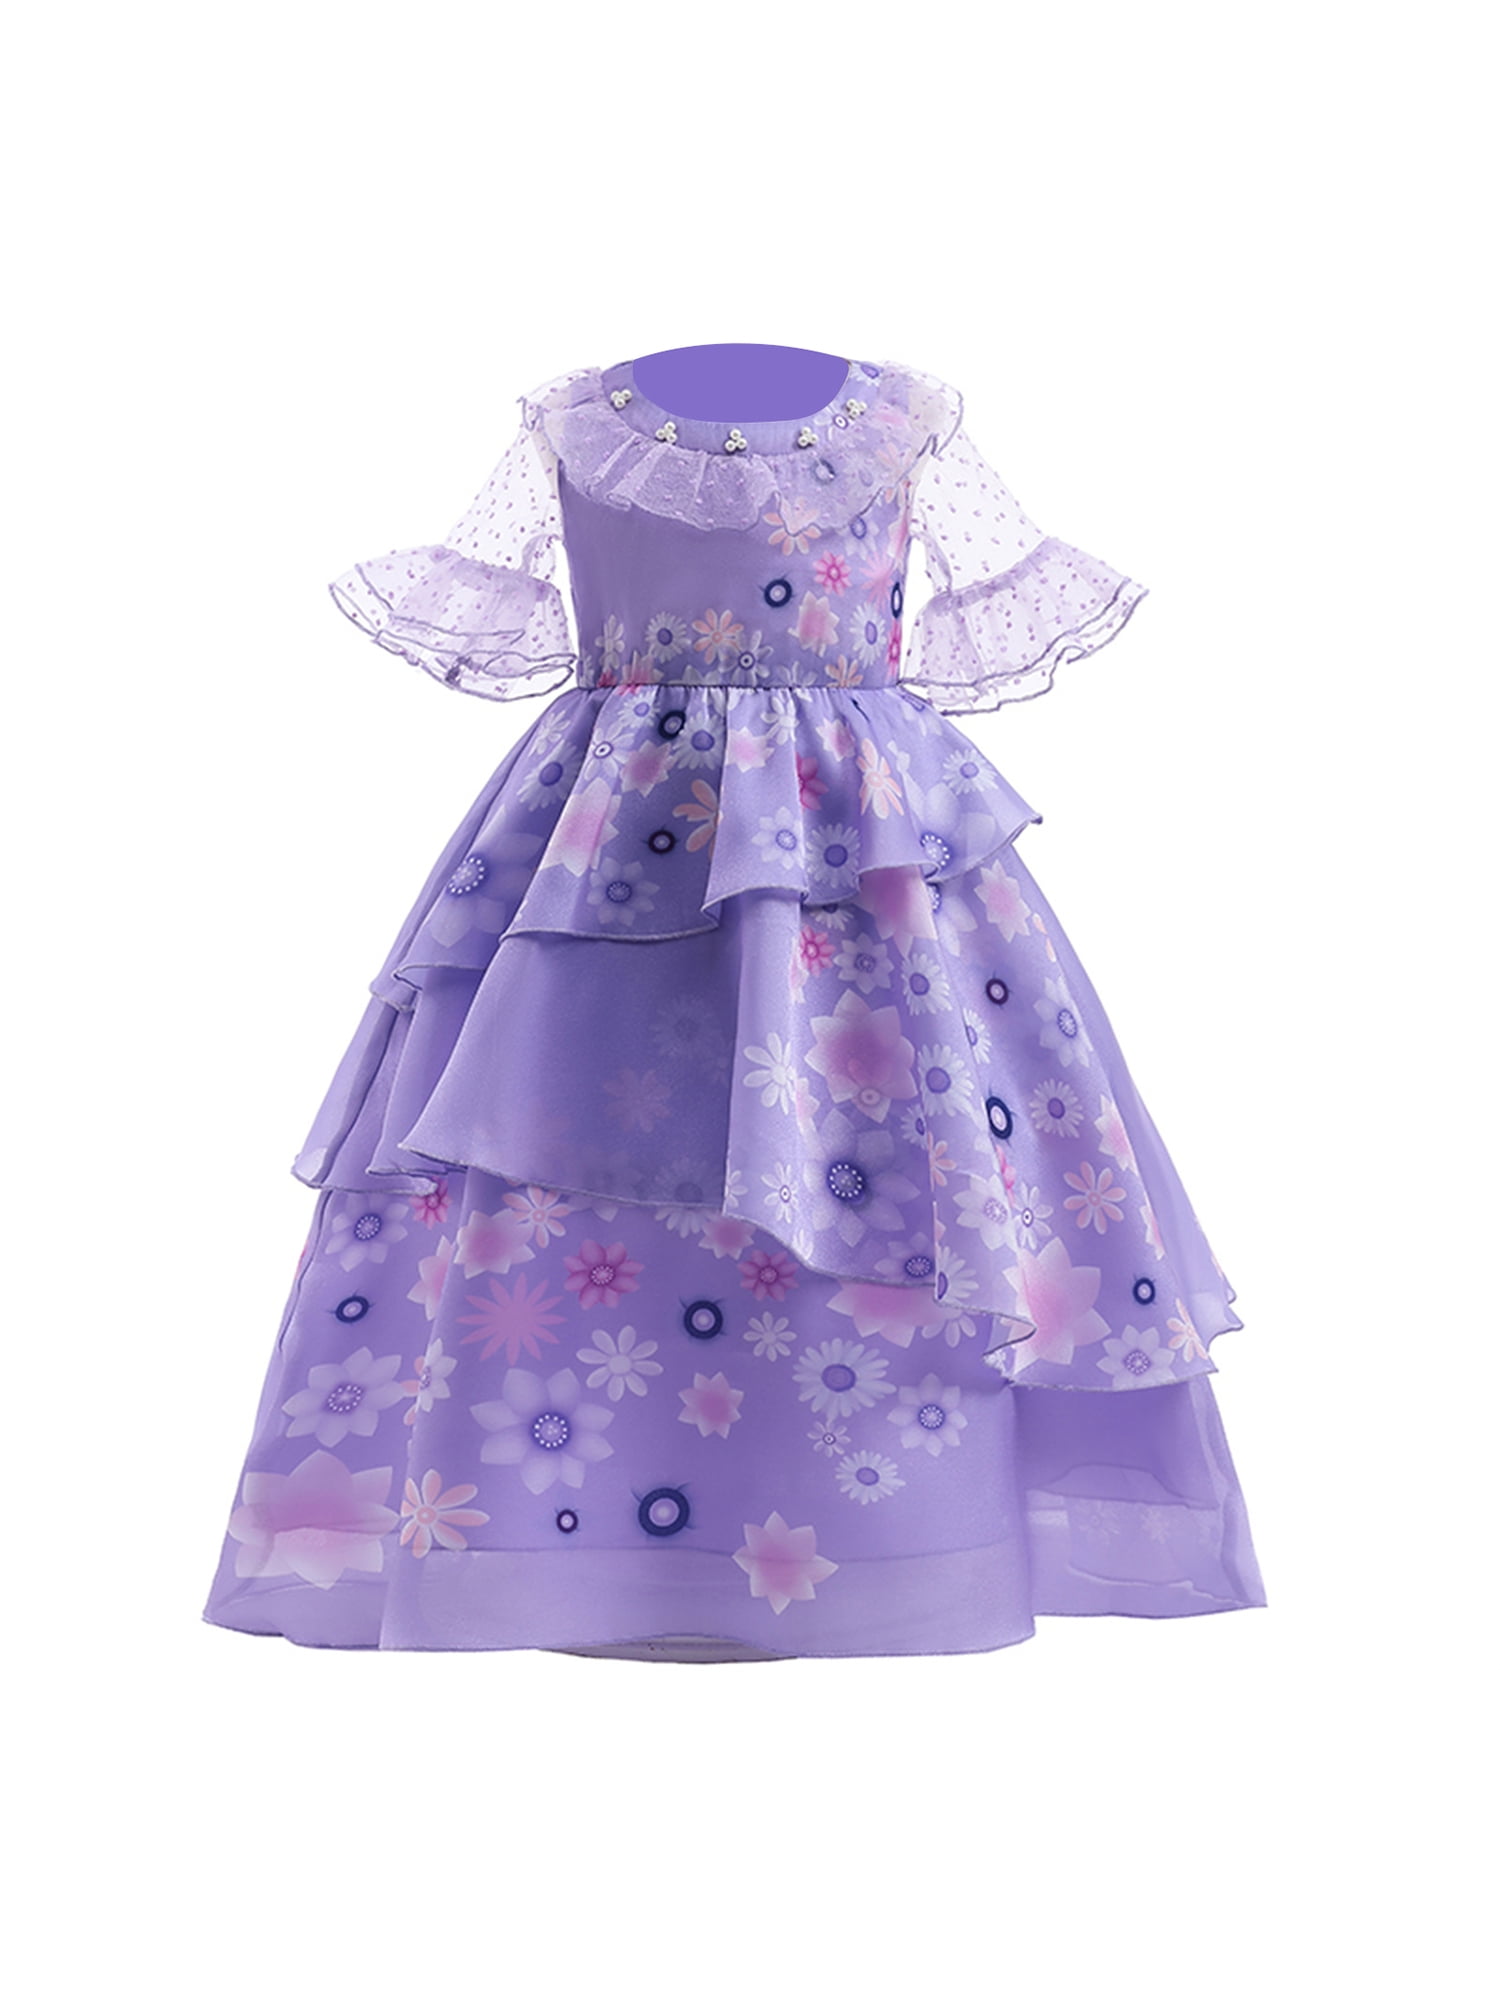 Girls Ice 2 Halloween Birthday Party Cosplay Outfit for Little Child Kid Teen Princess Dress up Costume